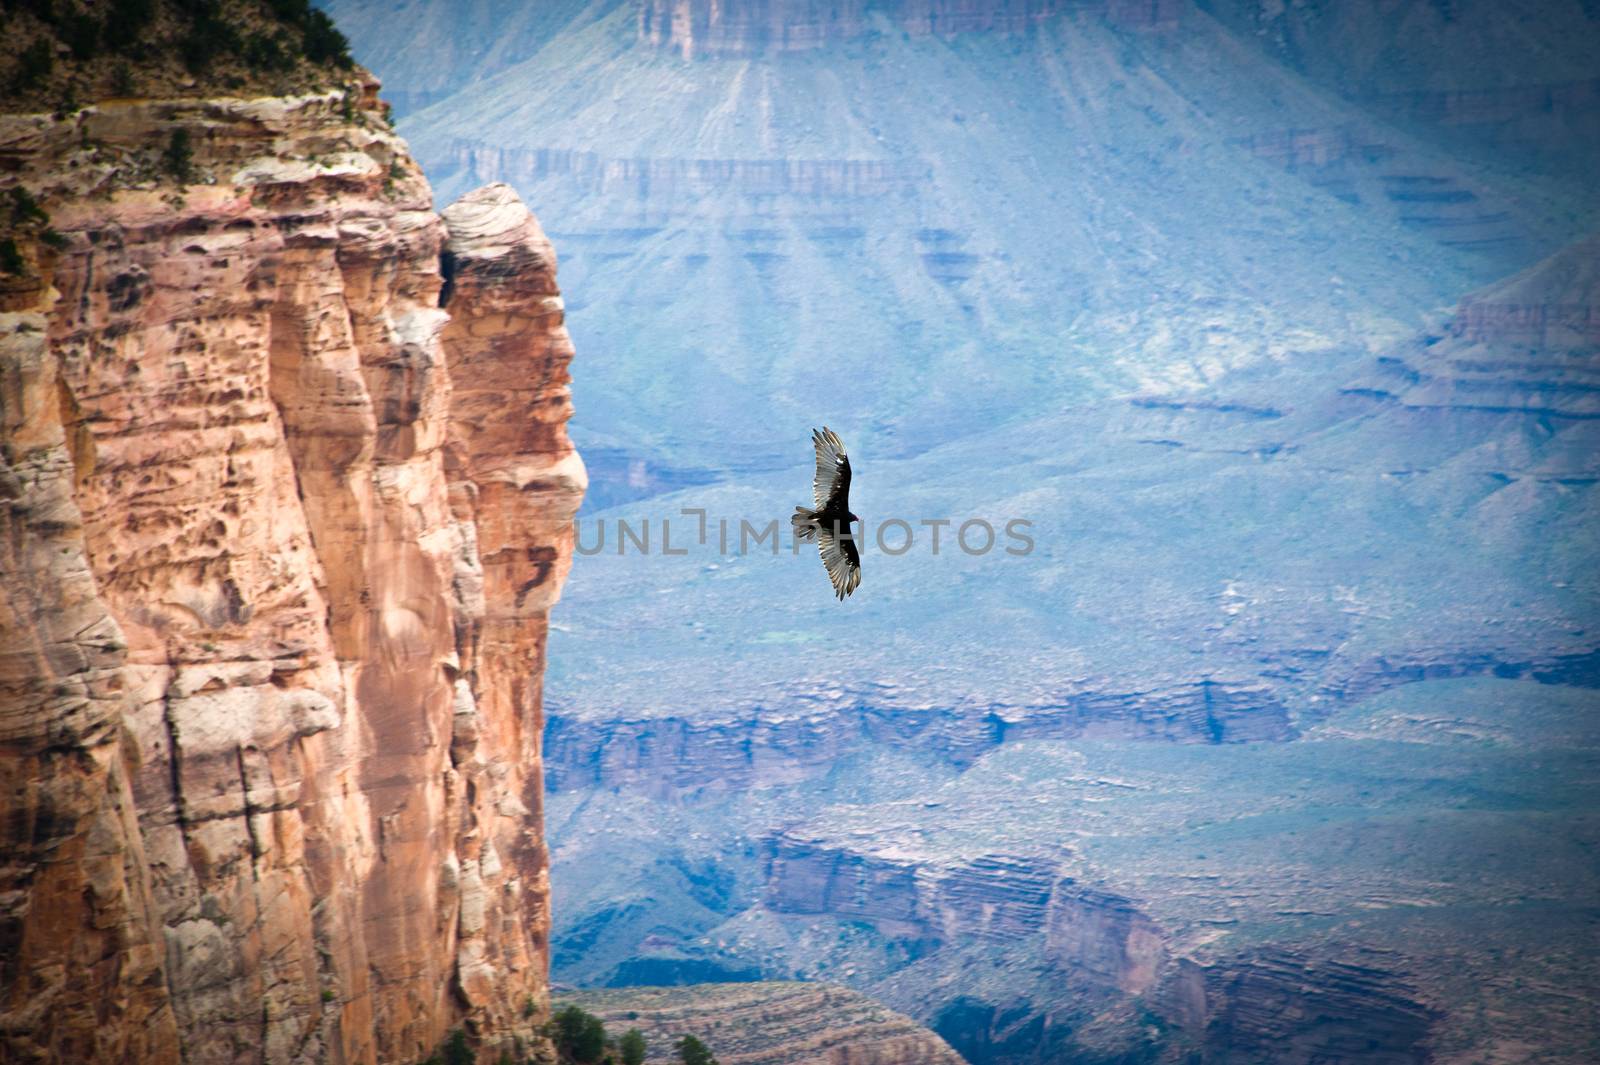 Bird flying over the grand canyon by CelsoDiniz